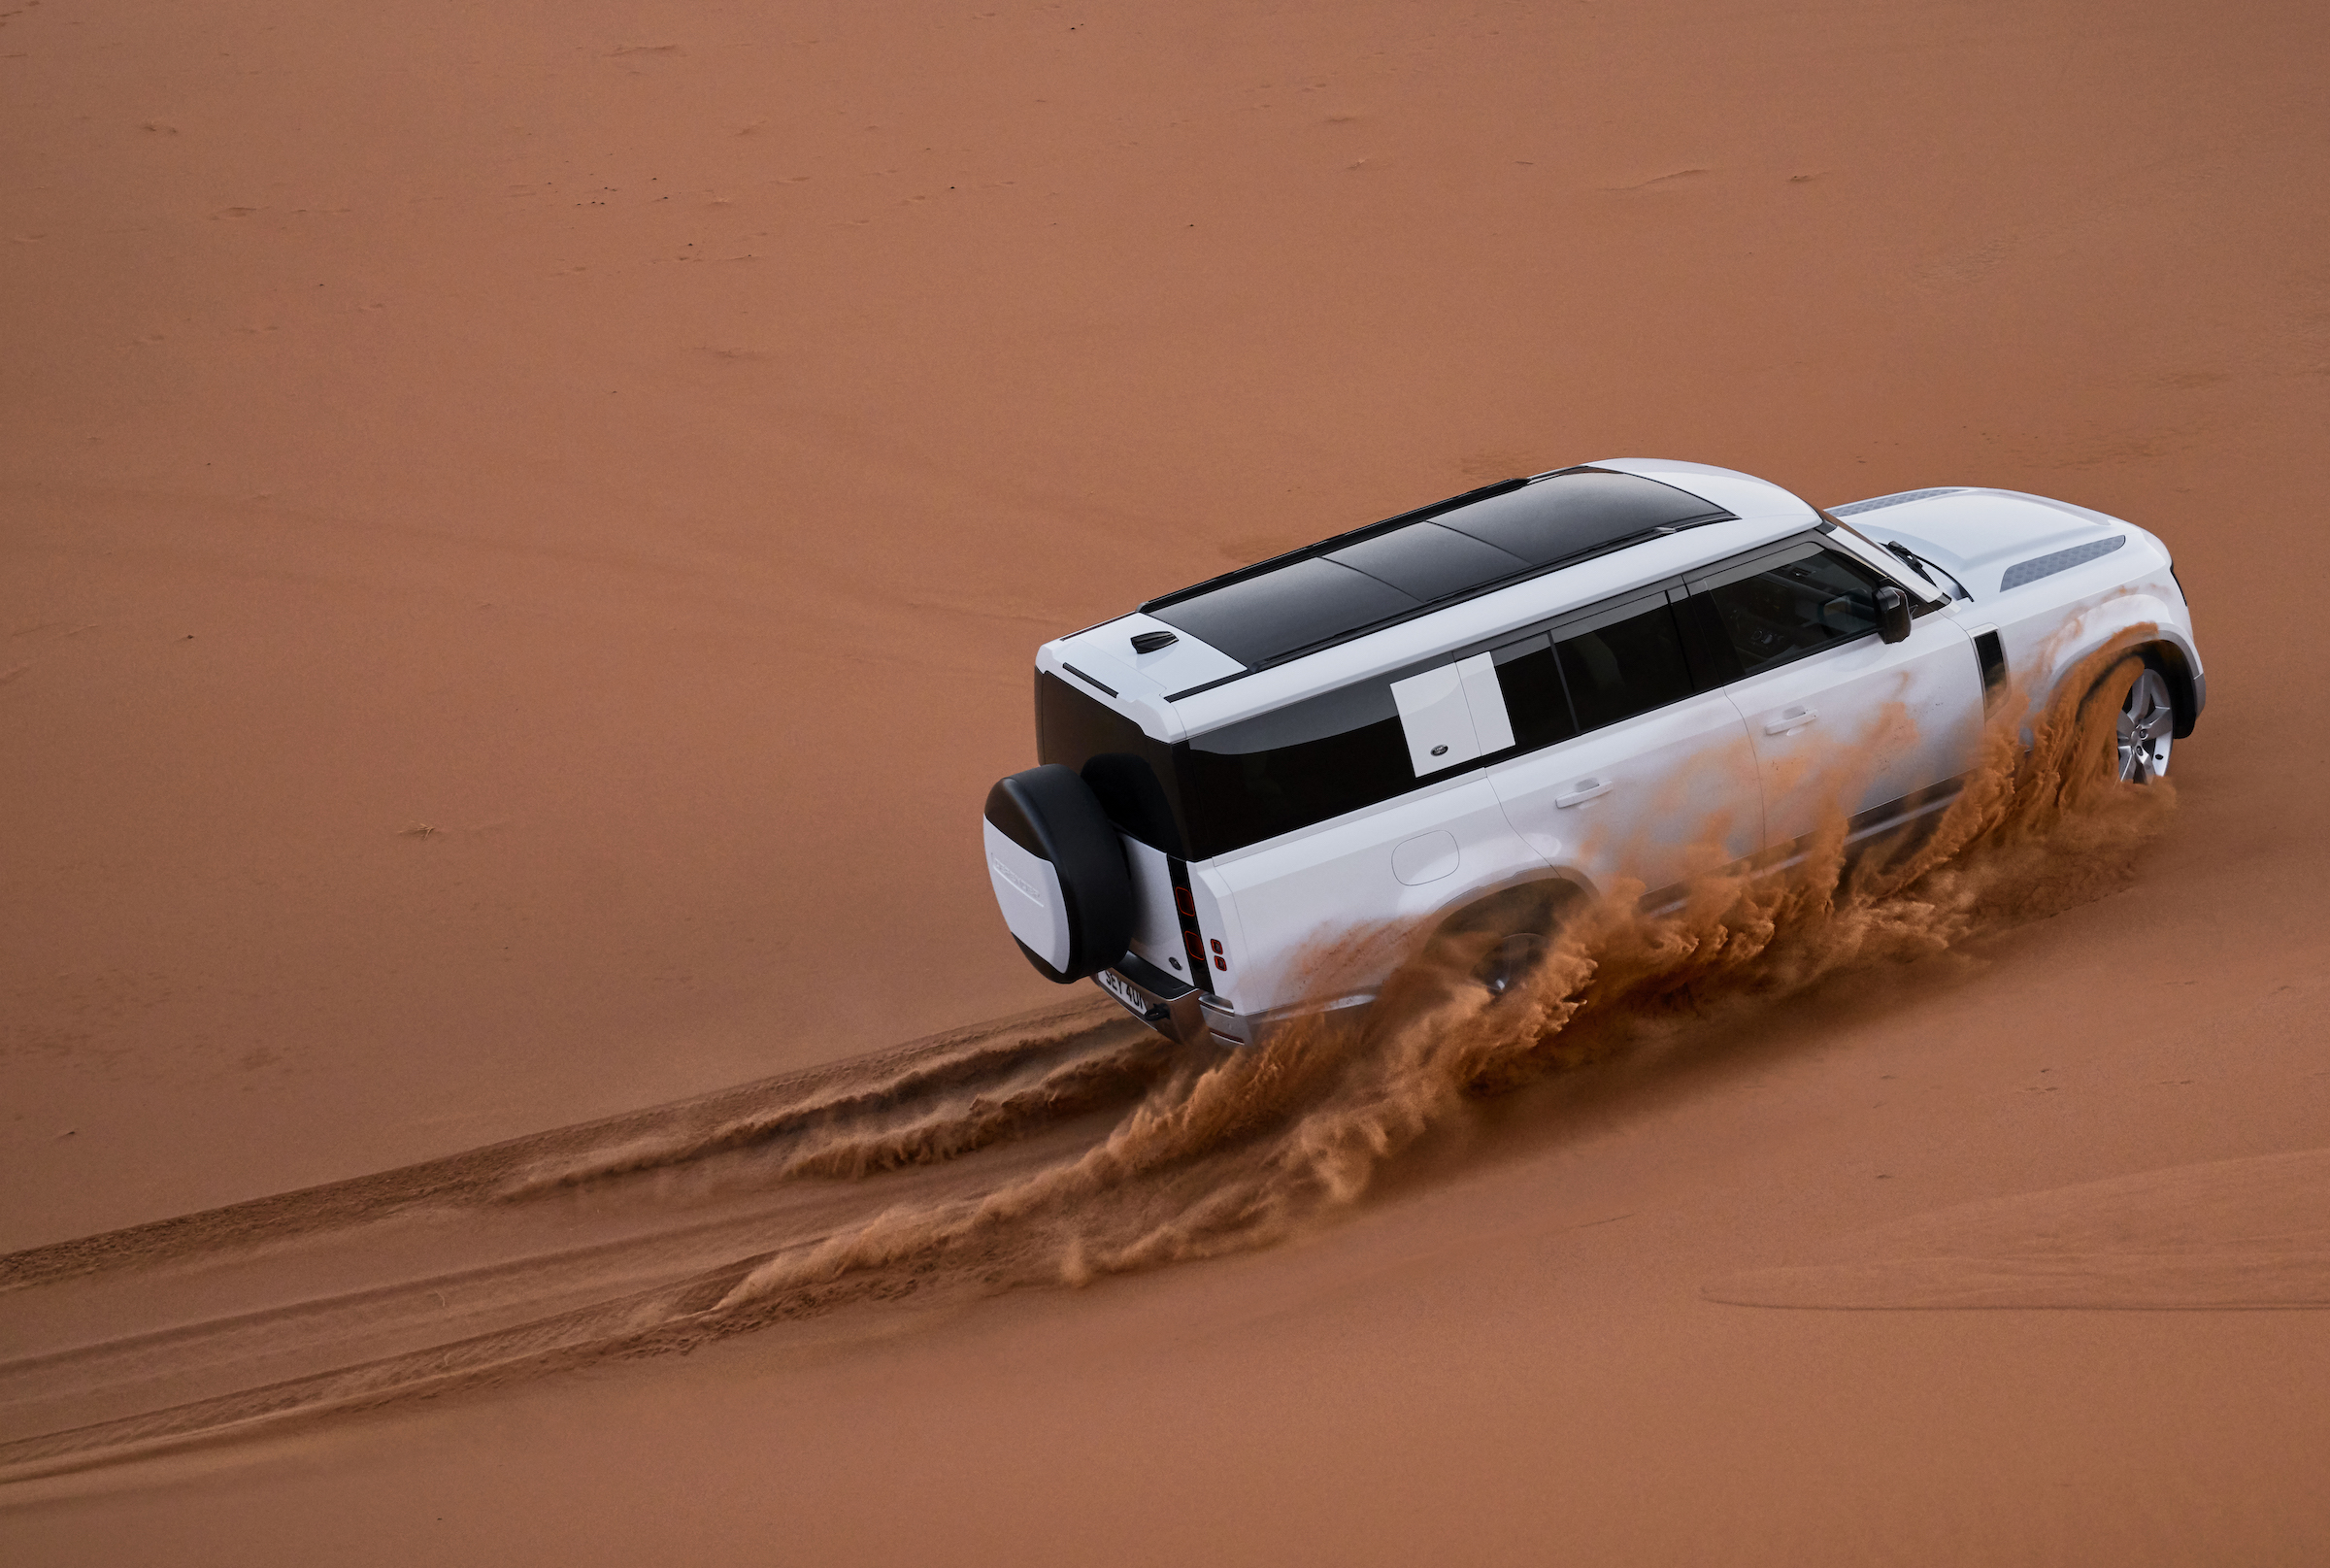 Adventures for eight await with new Land Rover Defender 130